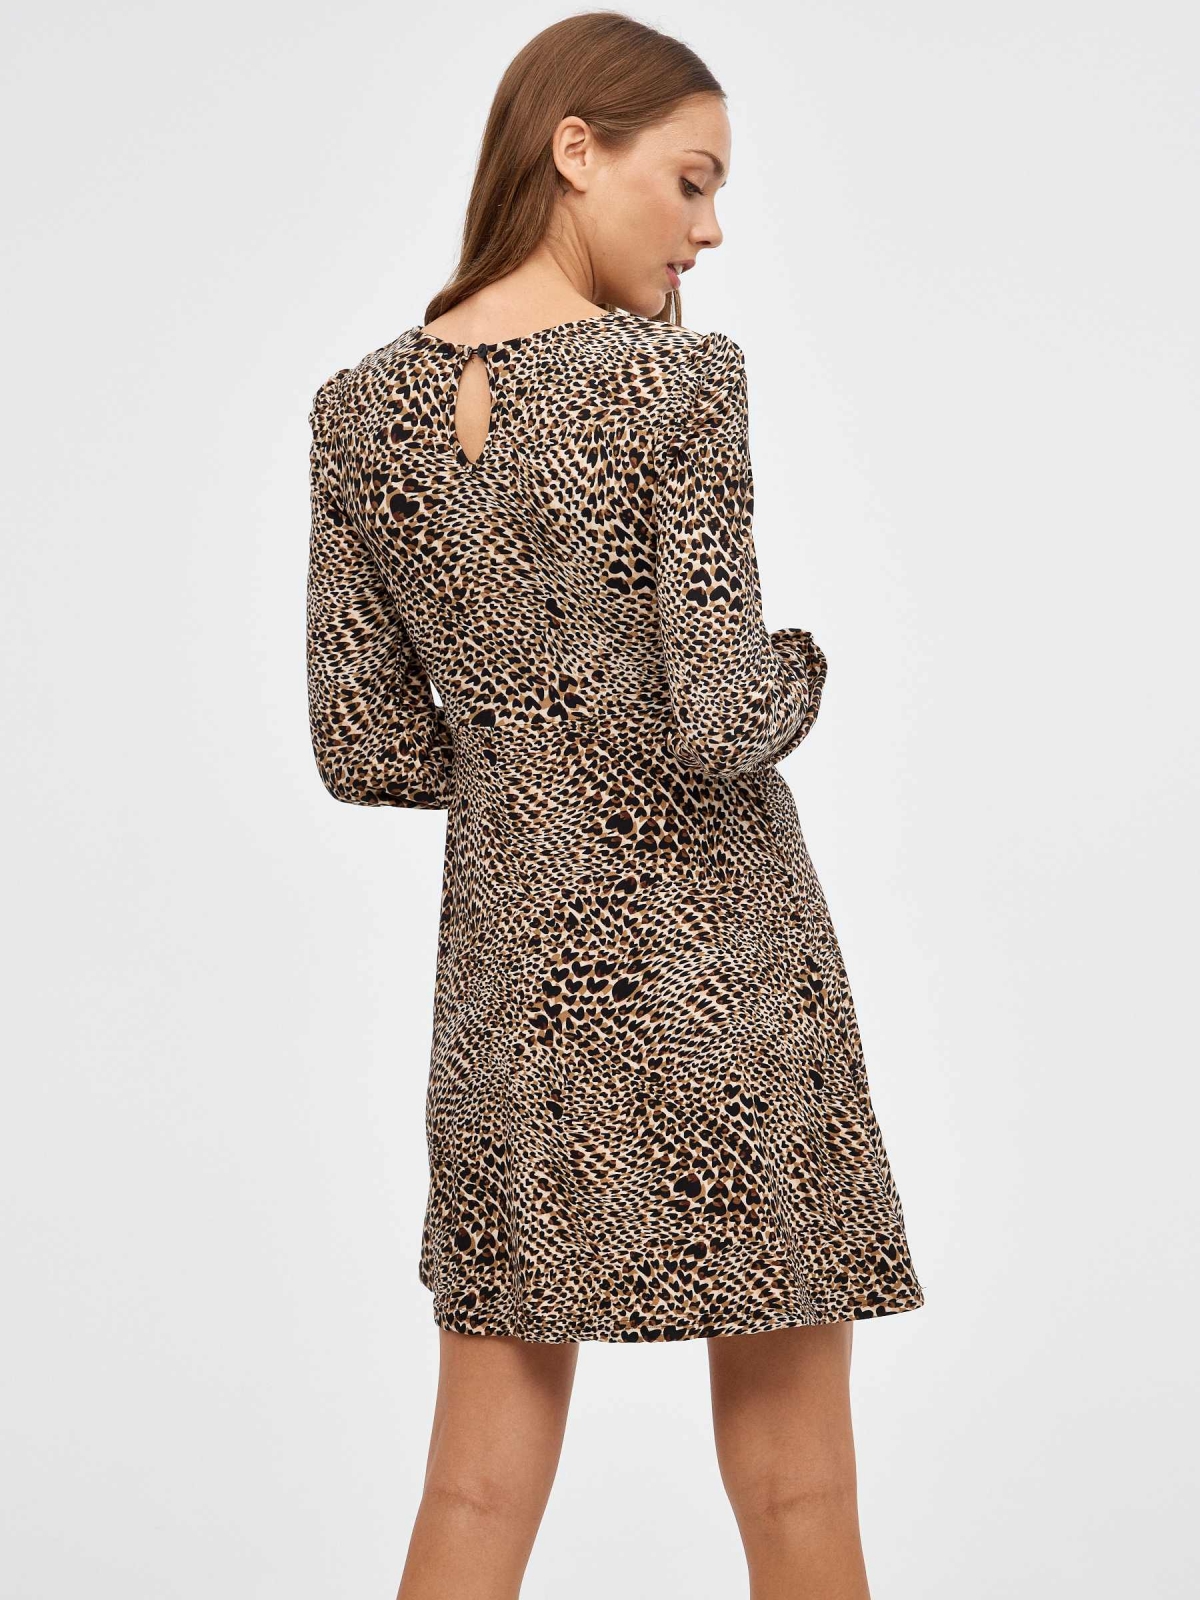 Flare animal print dress with cut out beige middle back view